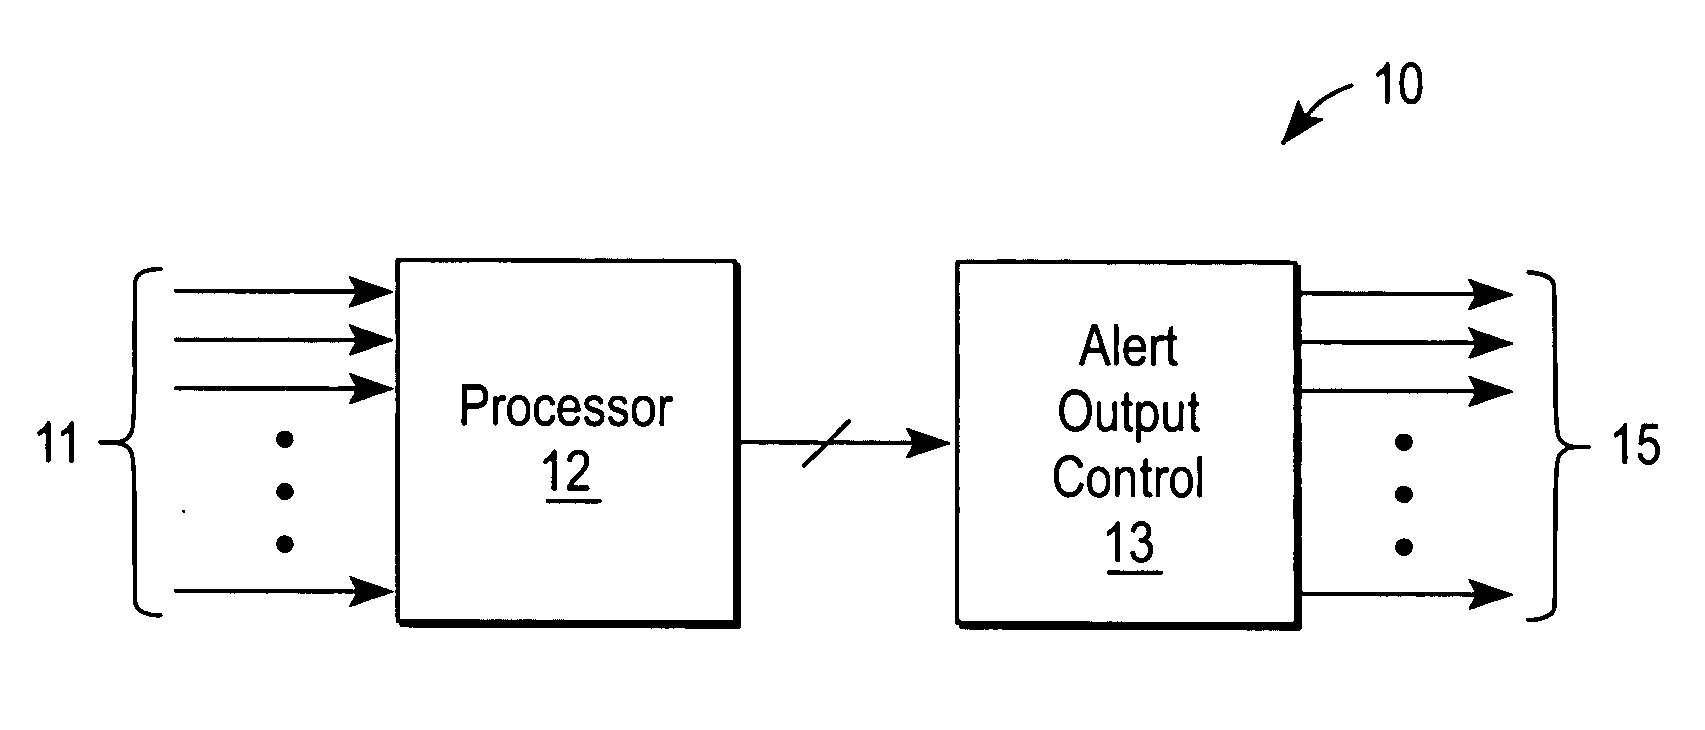 Handheld communications device with automatic alert mode selection